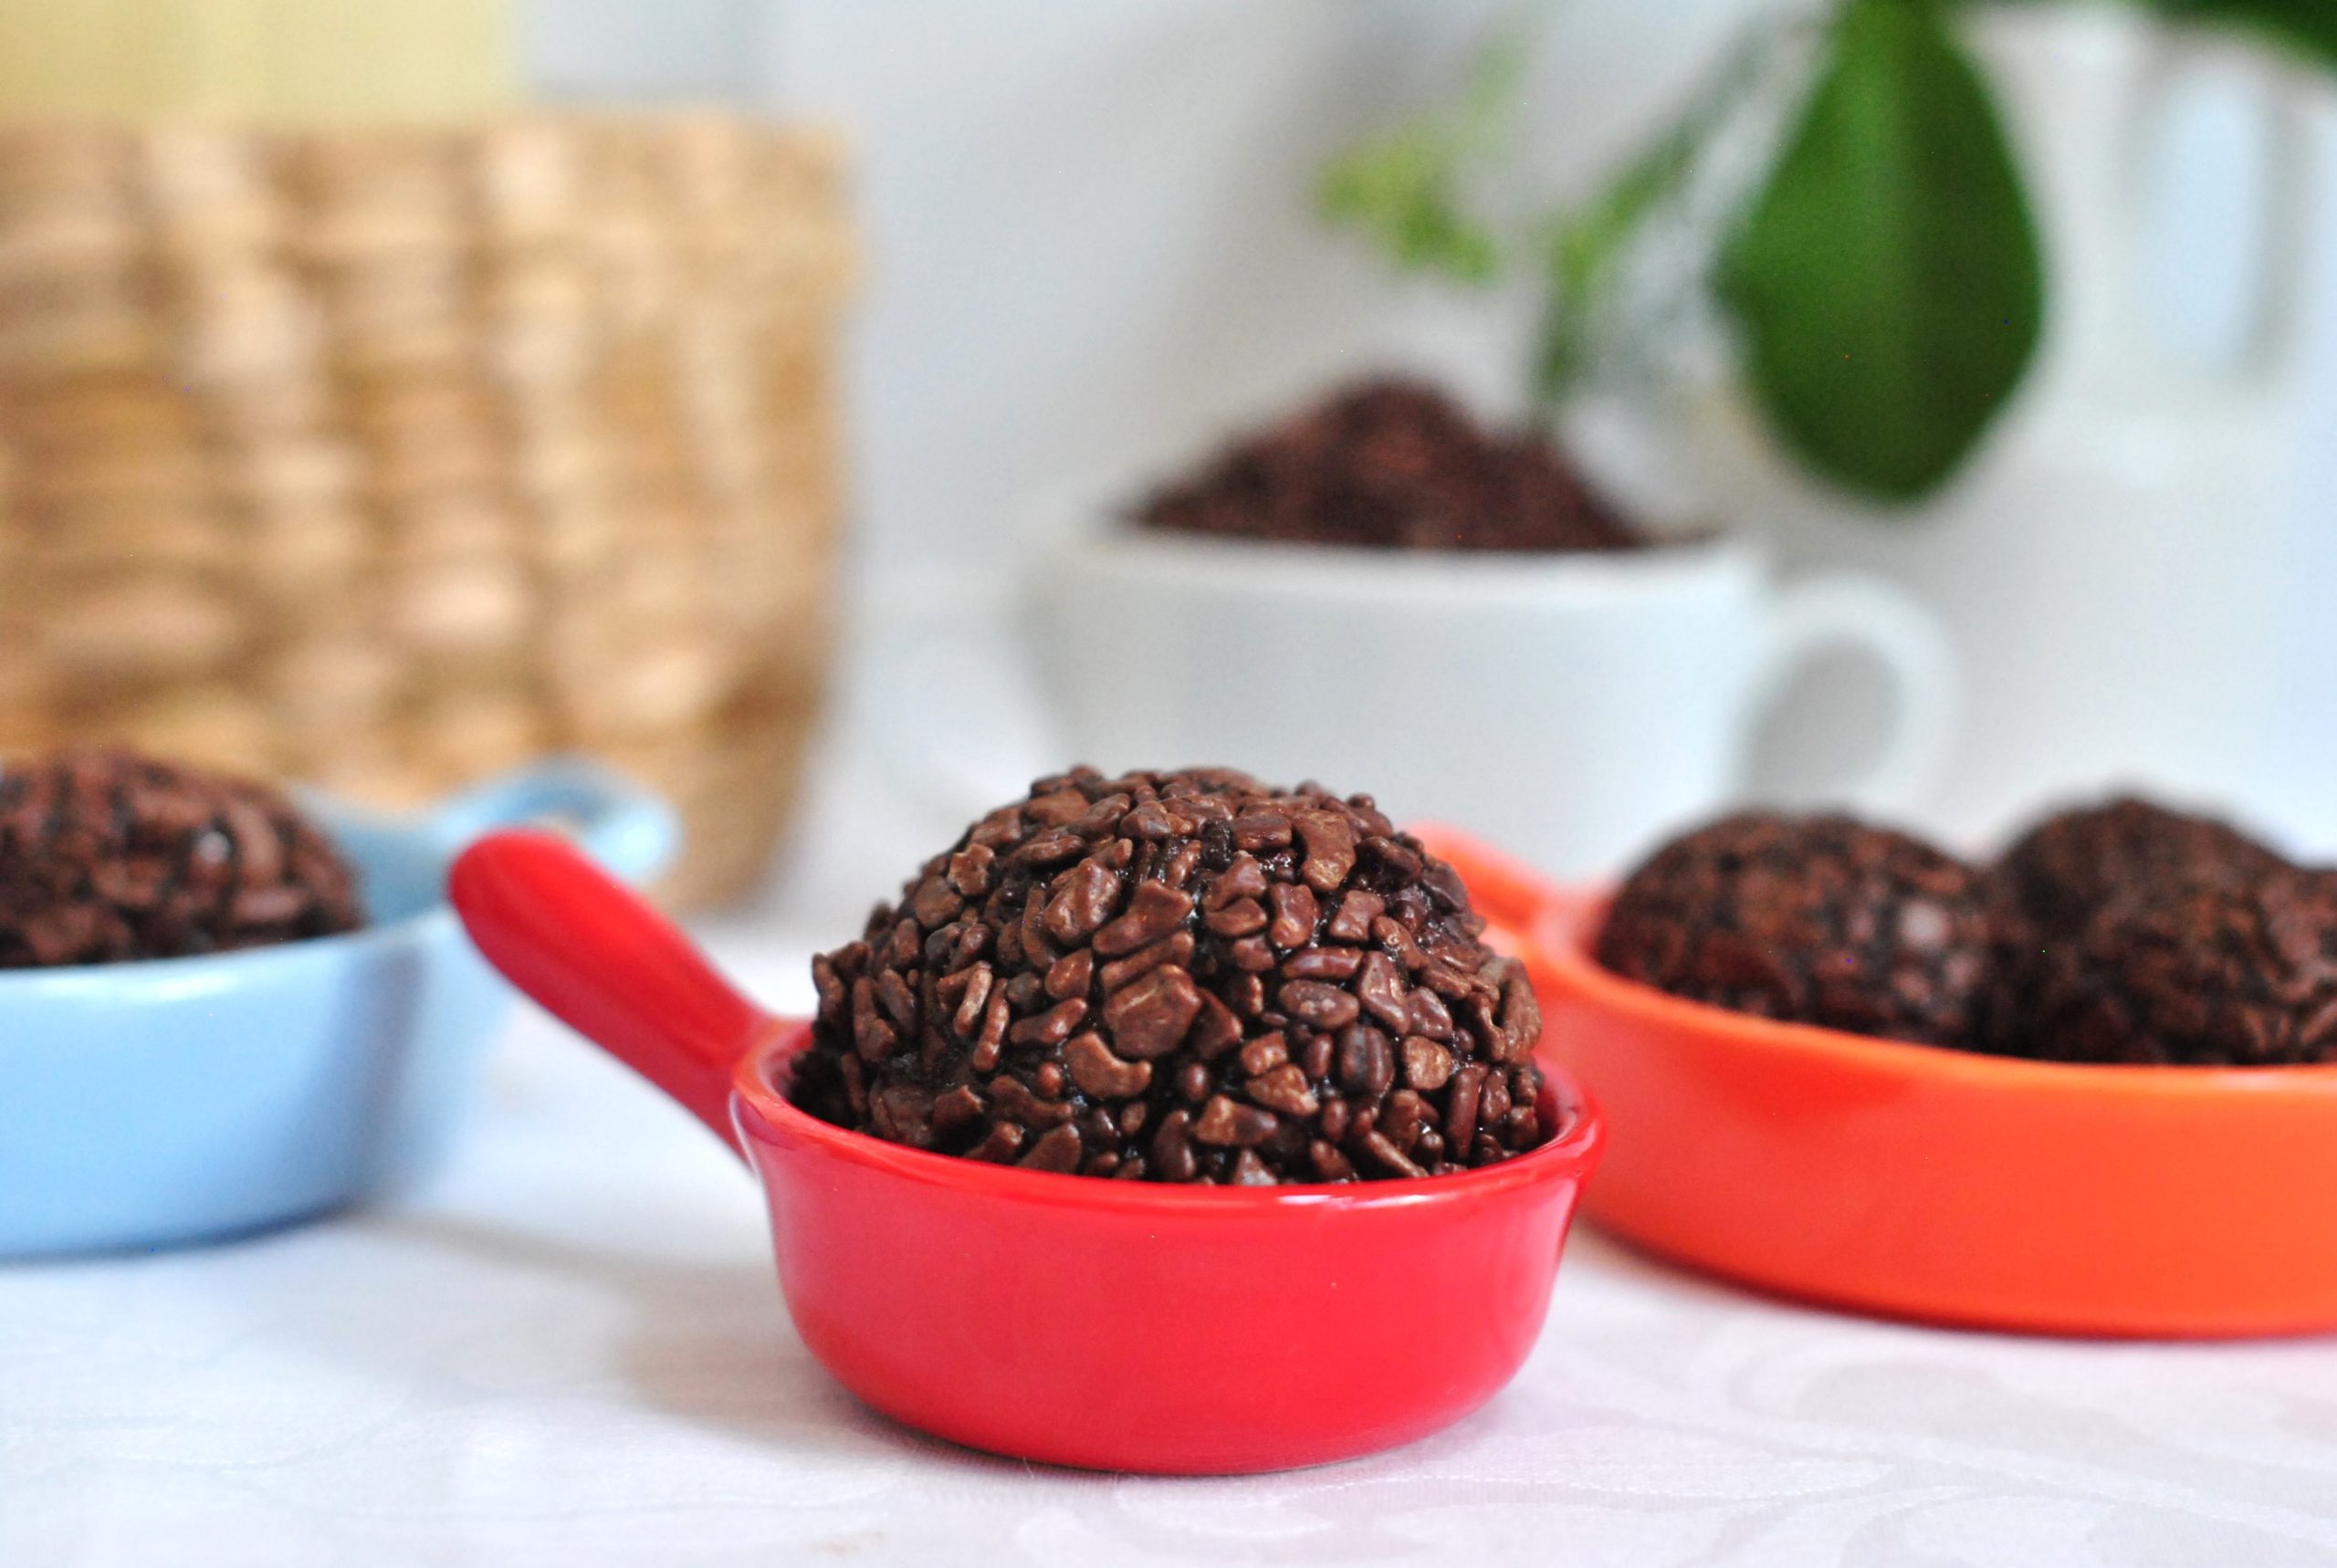 gluten-free brigadeiro without lactose and without condensed milk